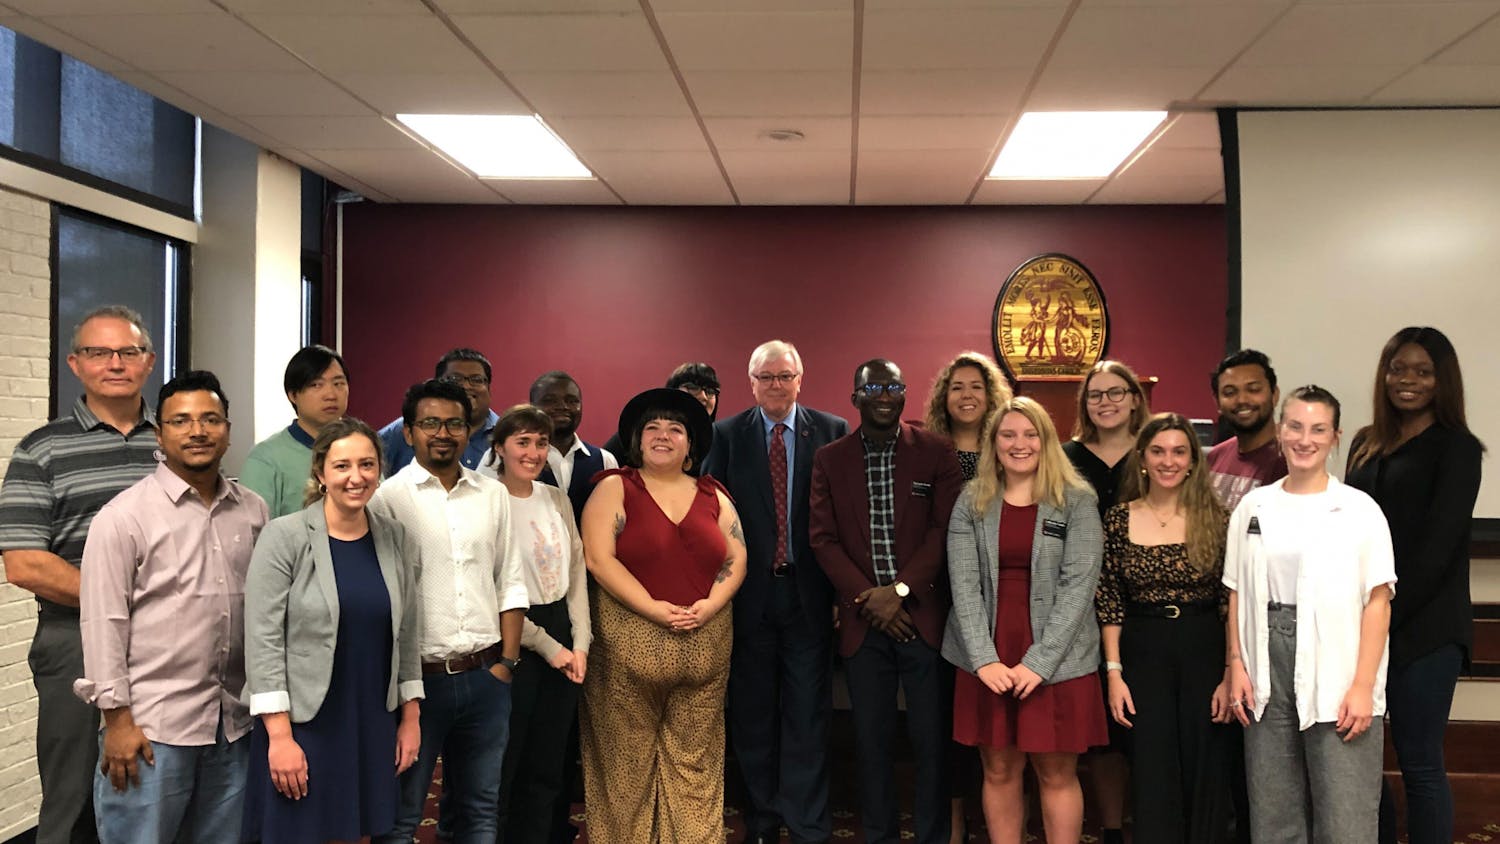 The USC Graduate Student Association poses for a photo with President Amiridis after its meeting on Aug. 17, 2022. The GSA is group of graduate and professional students that advocates for the advancement of graduate students at the university.